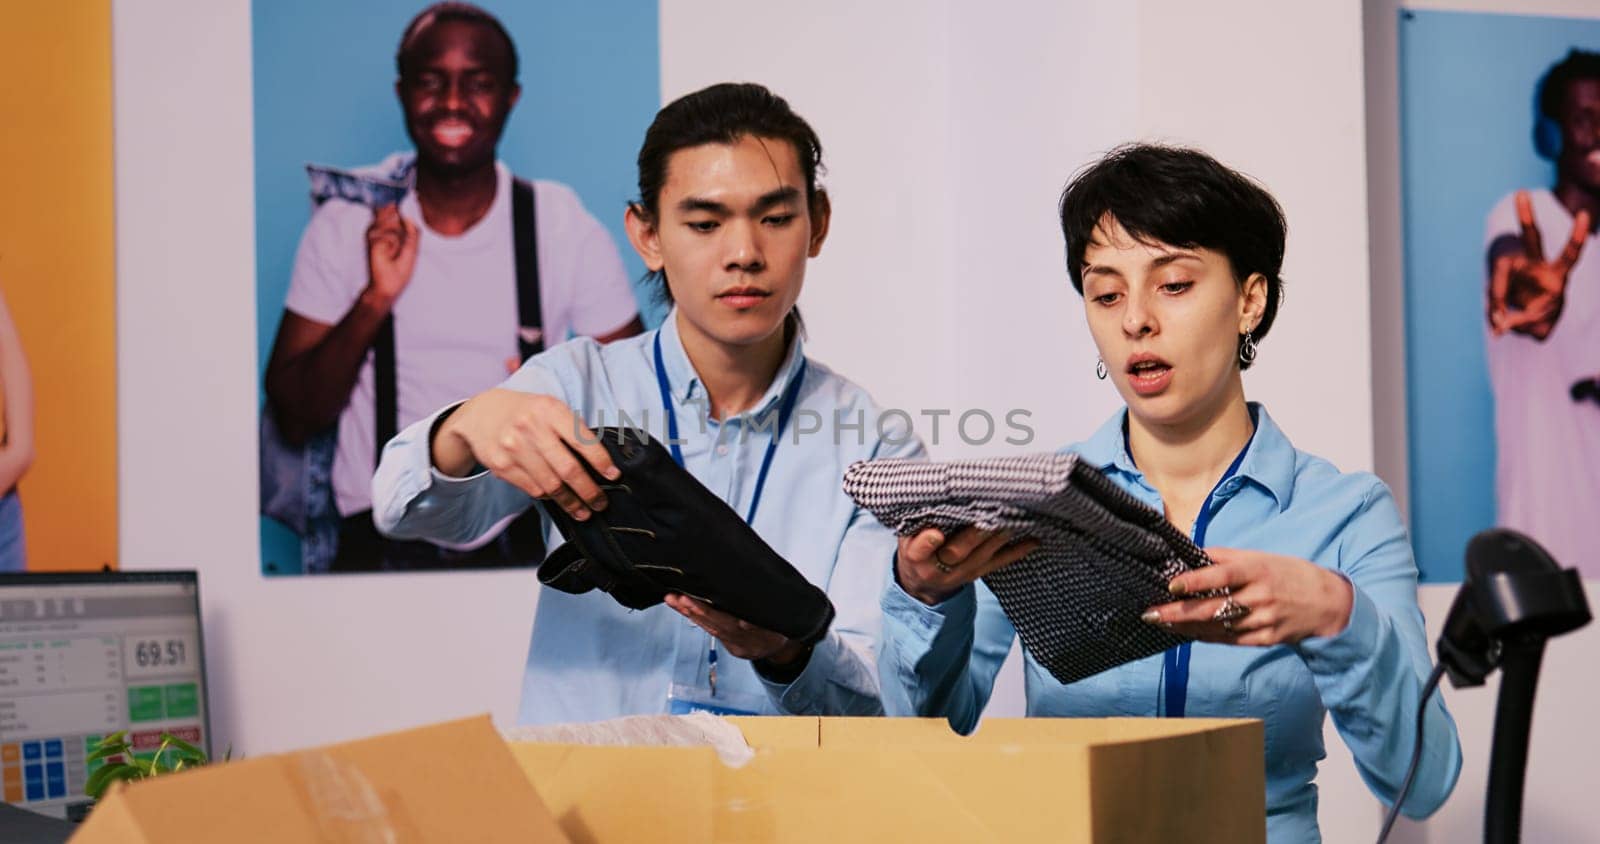 Managers preparing packages for shipping by DCStudio